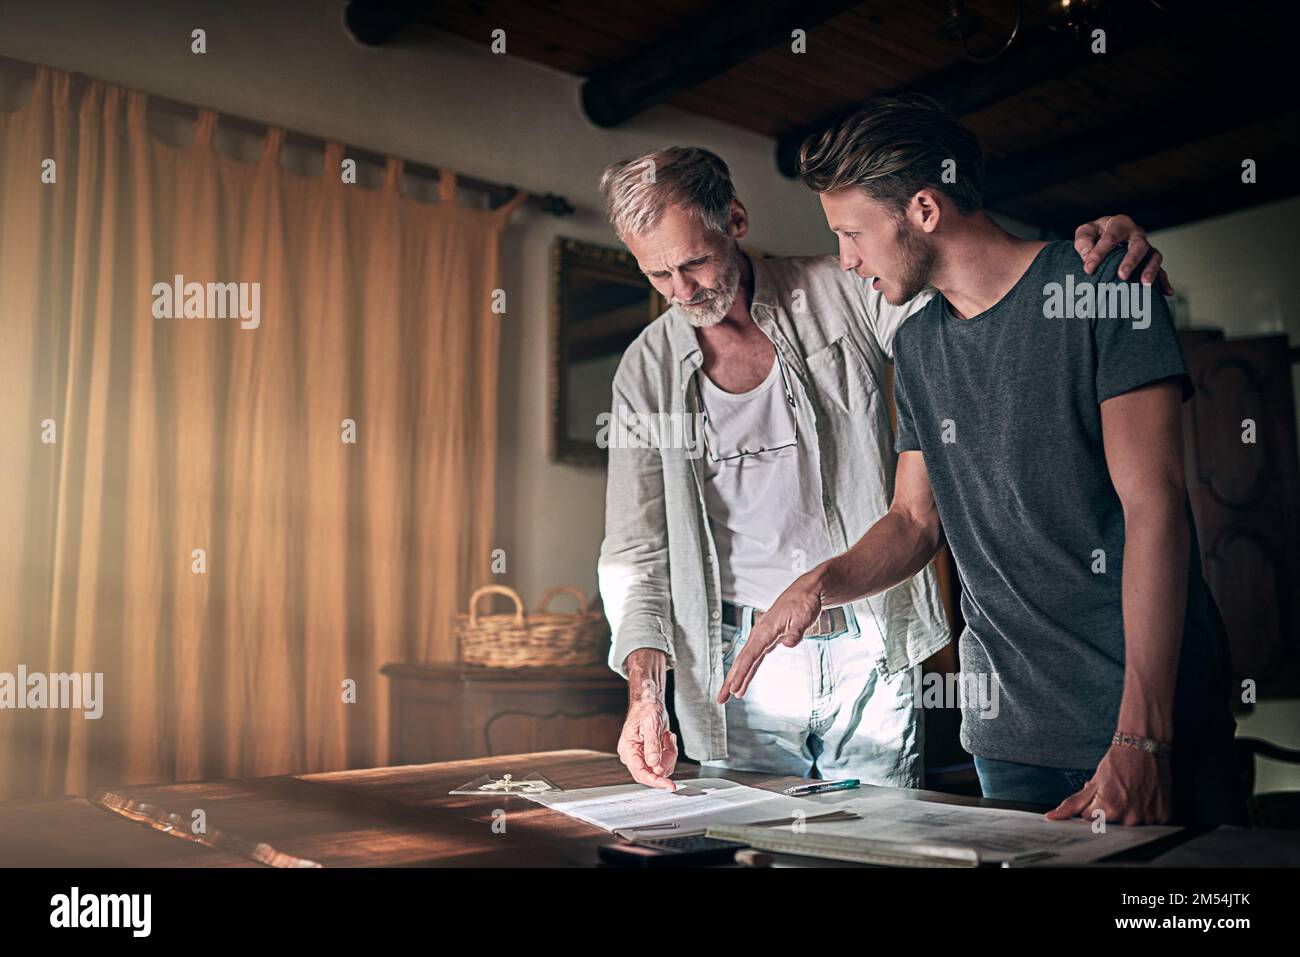 Getting advice from an old pro. a father and his son working on a design for their family business at home. Stock Photo